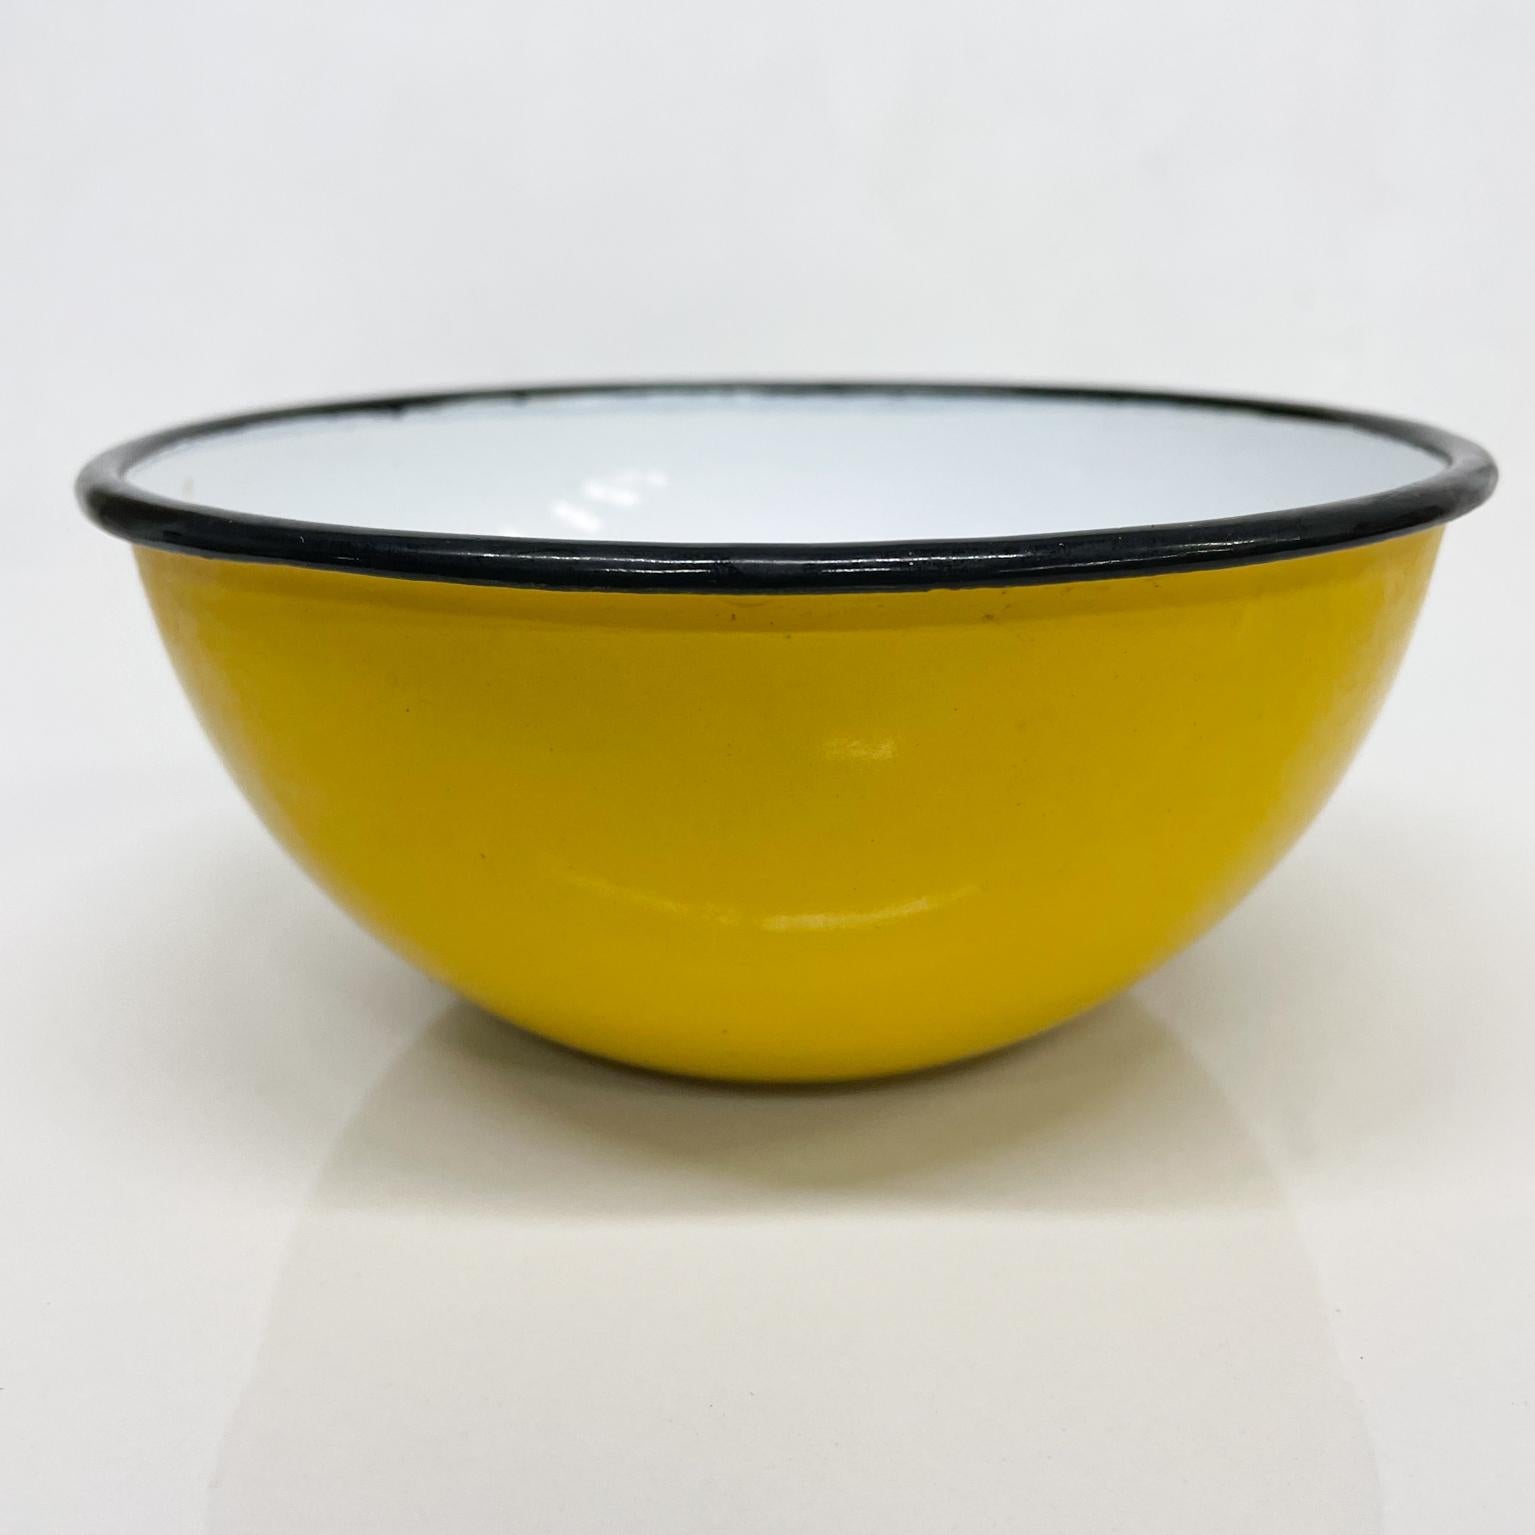 Huta Silesia Poland enamelware Medium size yellow bowl
Yellow exterior white interior black trim
Measures: 5.88 diameter x 2.5 inches
Maker Stamped underneath. 
Preowned Condition Original Unrestored Clean Vintage.
Refer to images.
 